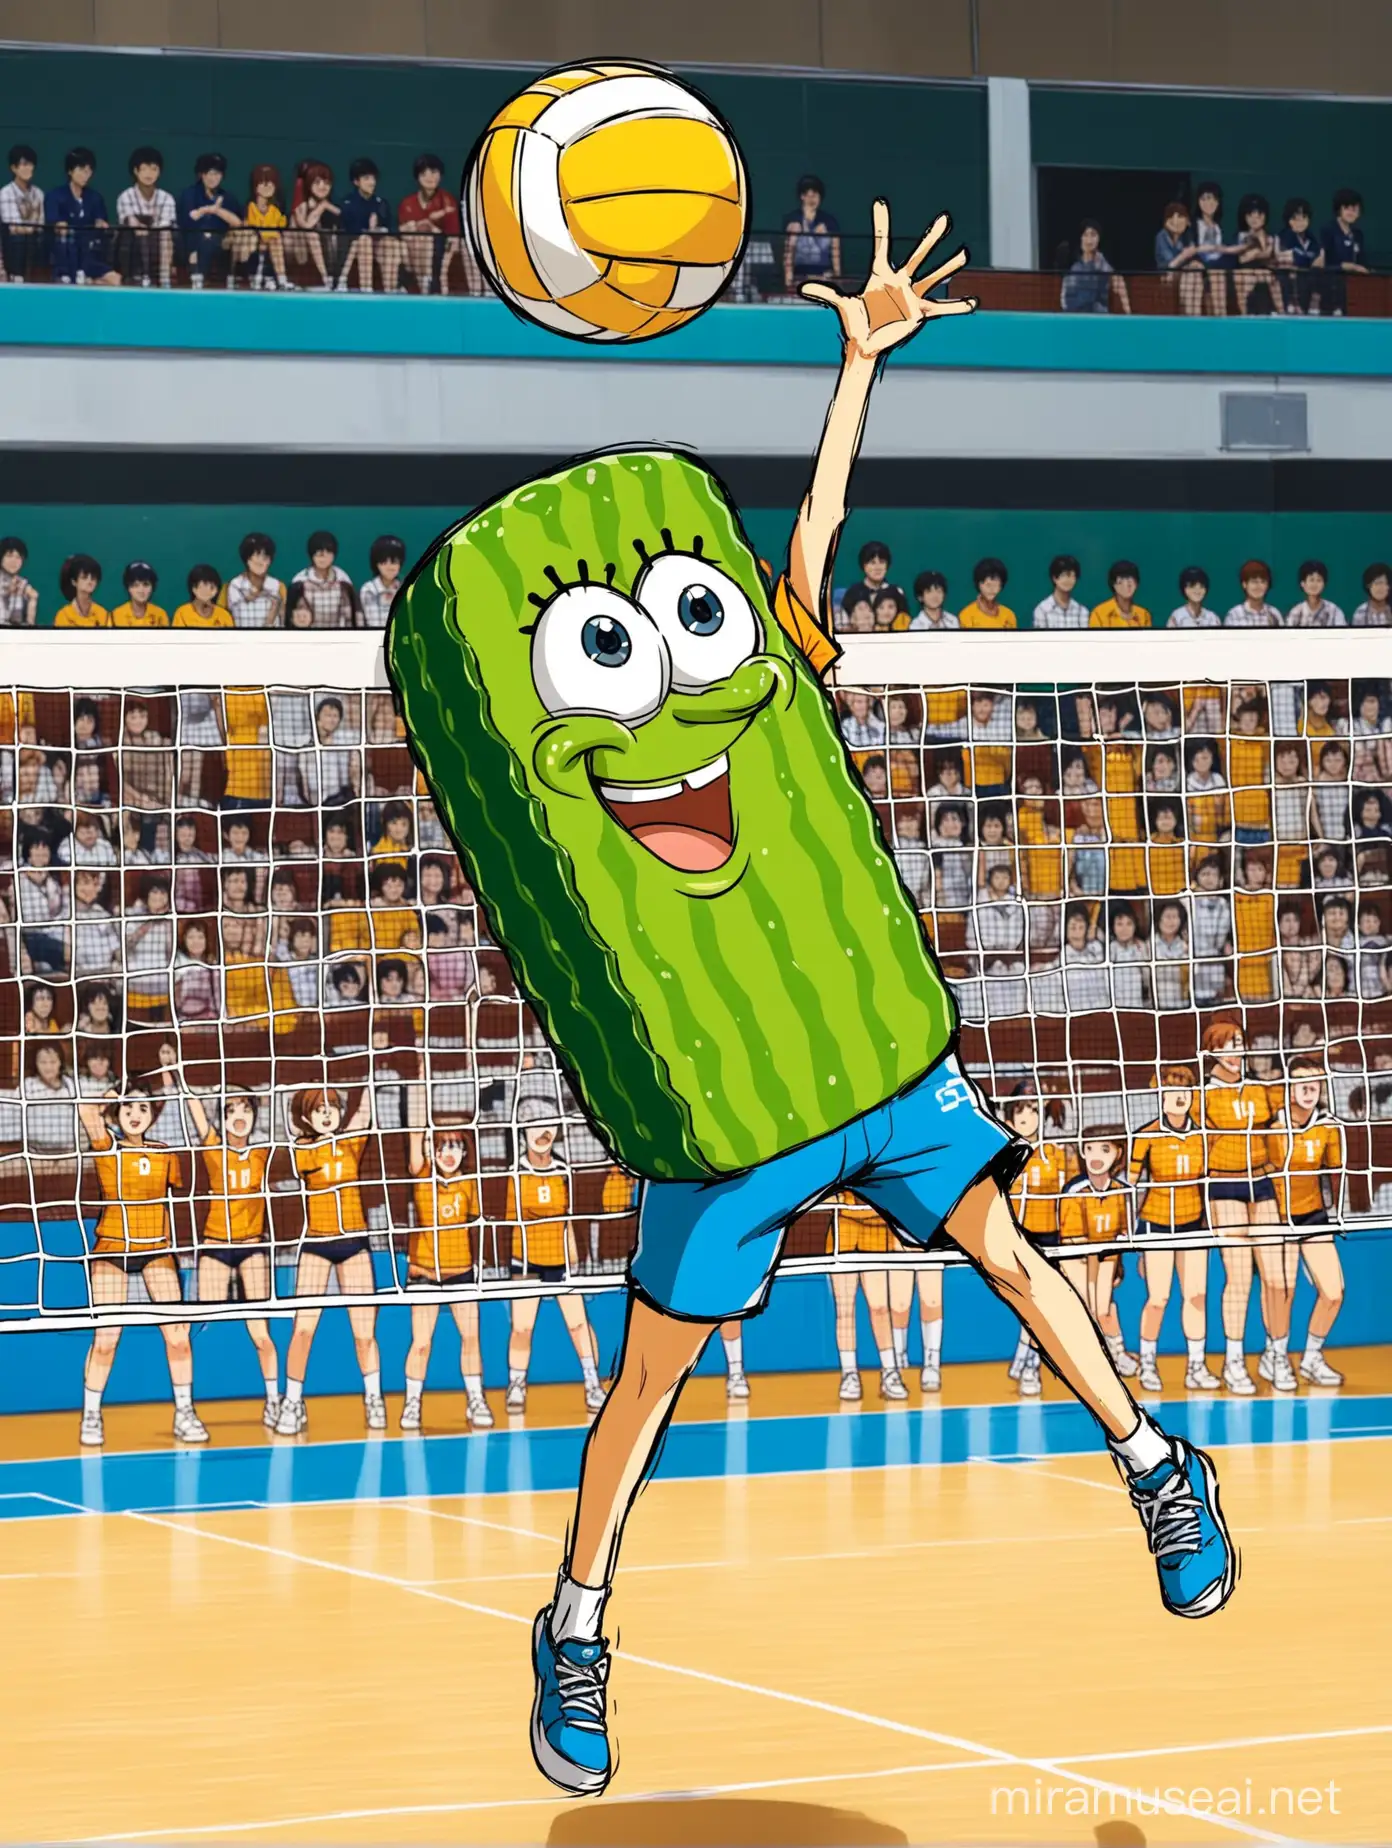 Vibrant Cucumber Kevin Hitting Whiffle Ball in HaikyuuStyle Volleyball Match